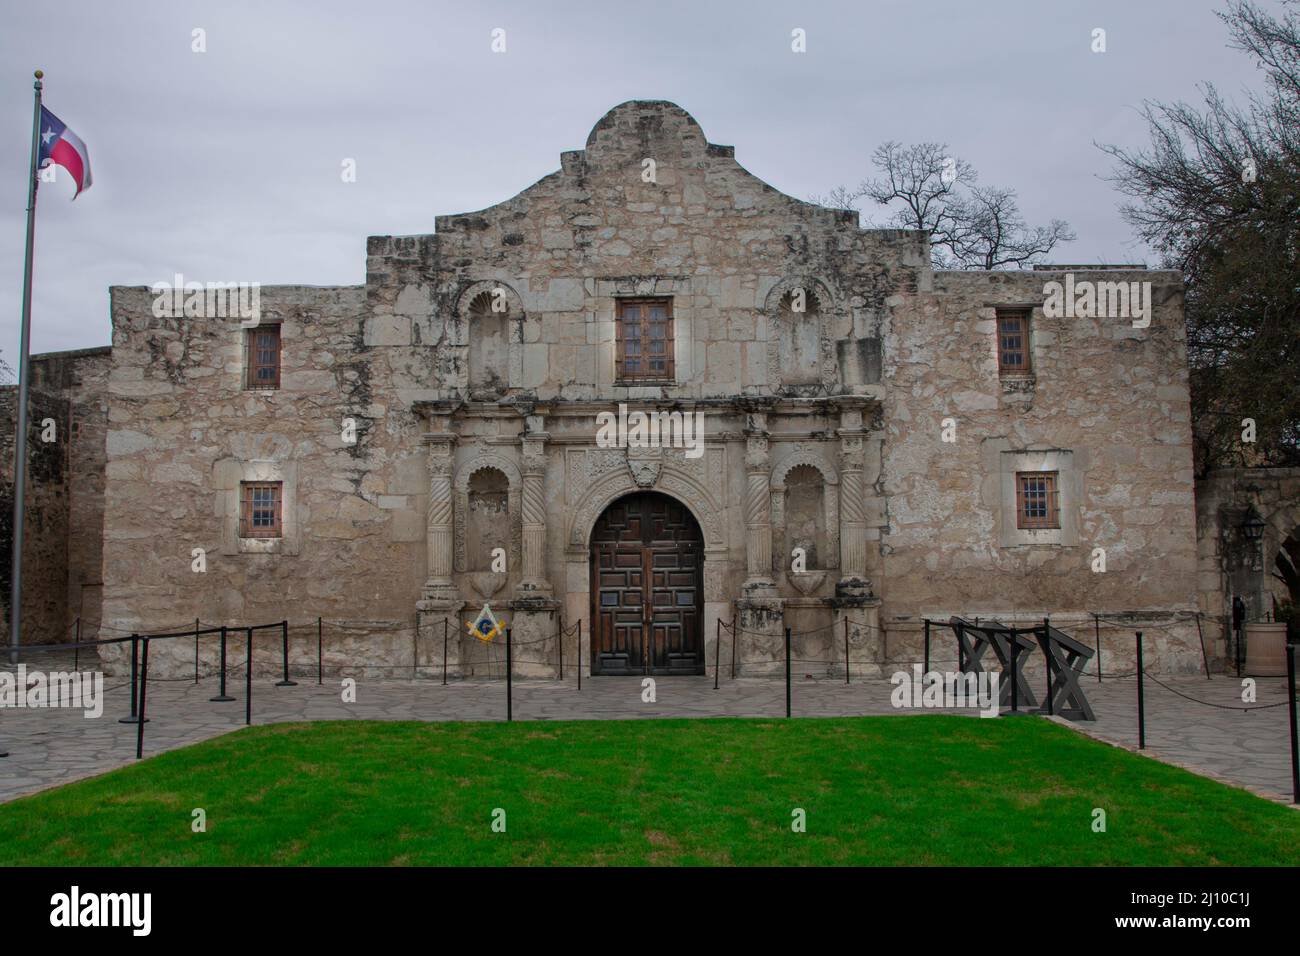 The flag of Texas flies over the entrance to the mission of the Alamo Stock Photo